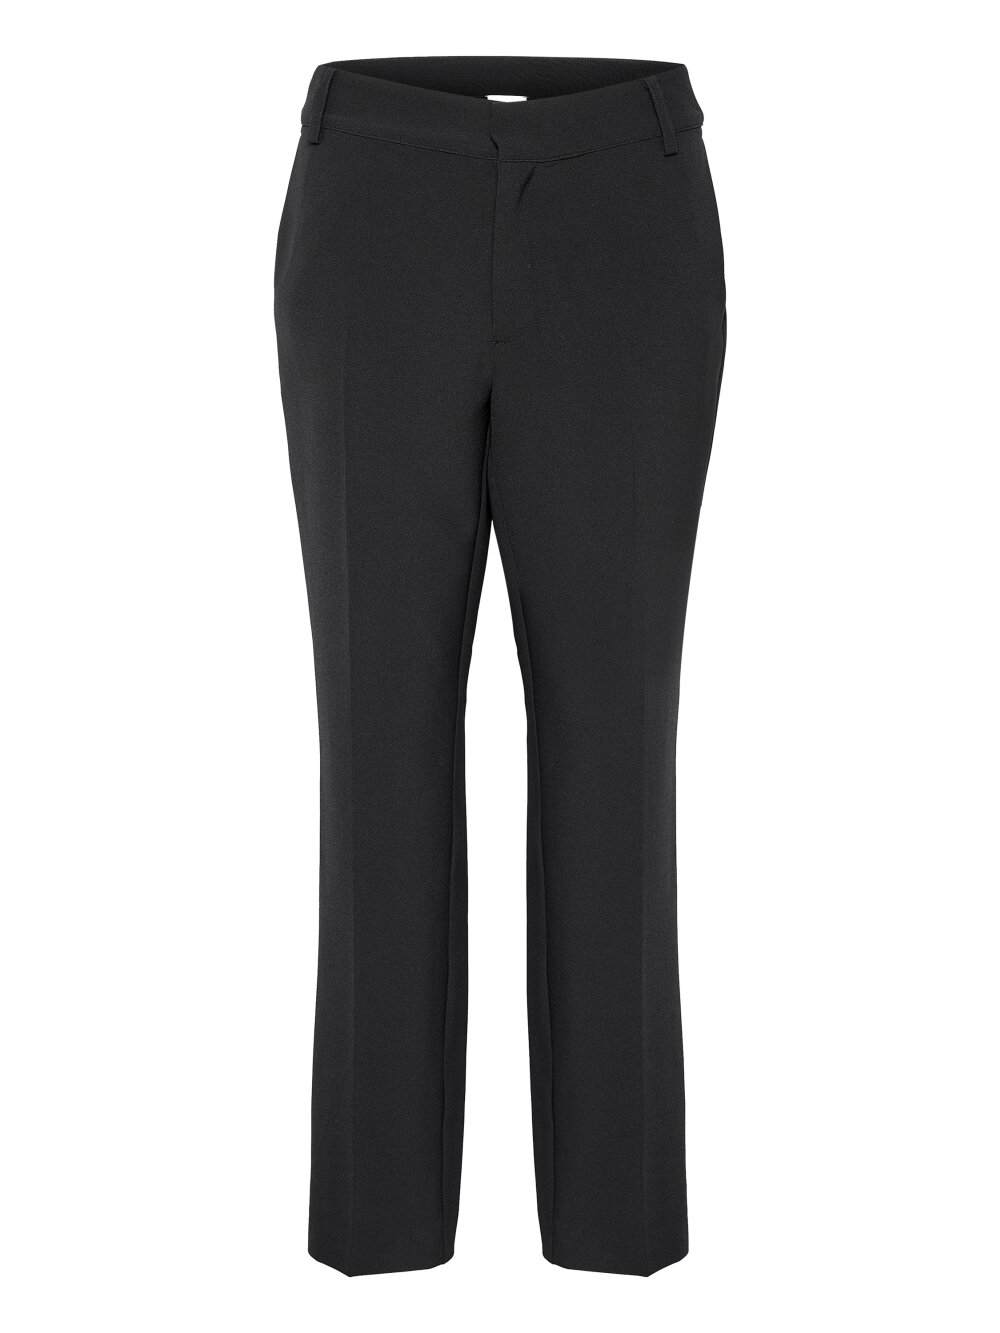 My Essential Wardrobe - 26 THE TAILORED STRAIGHT PANT